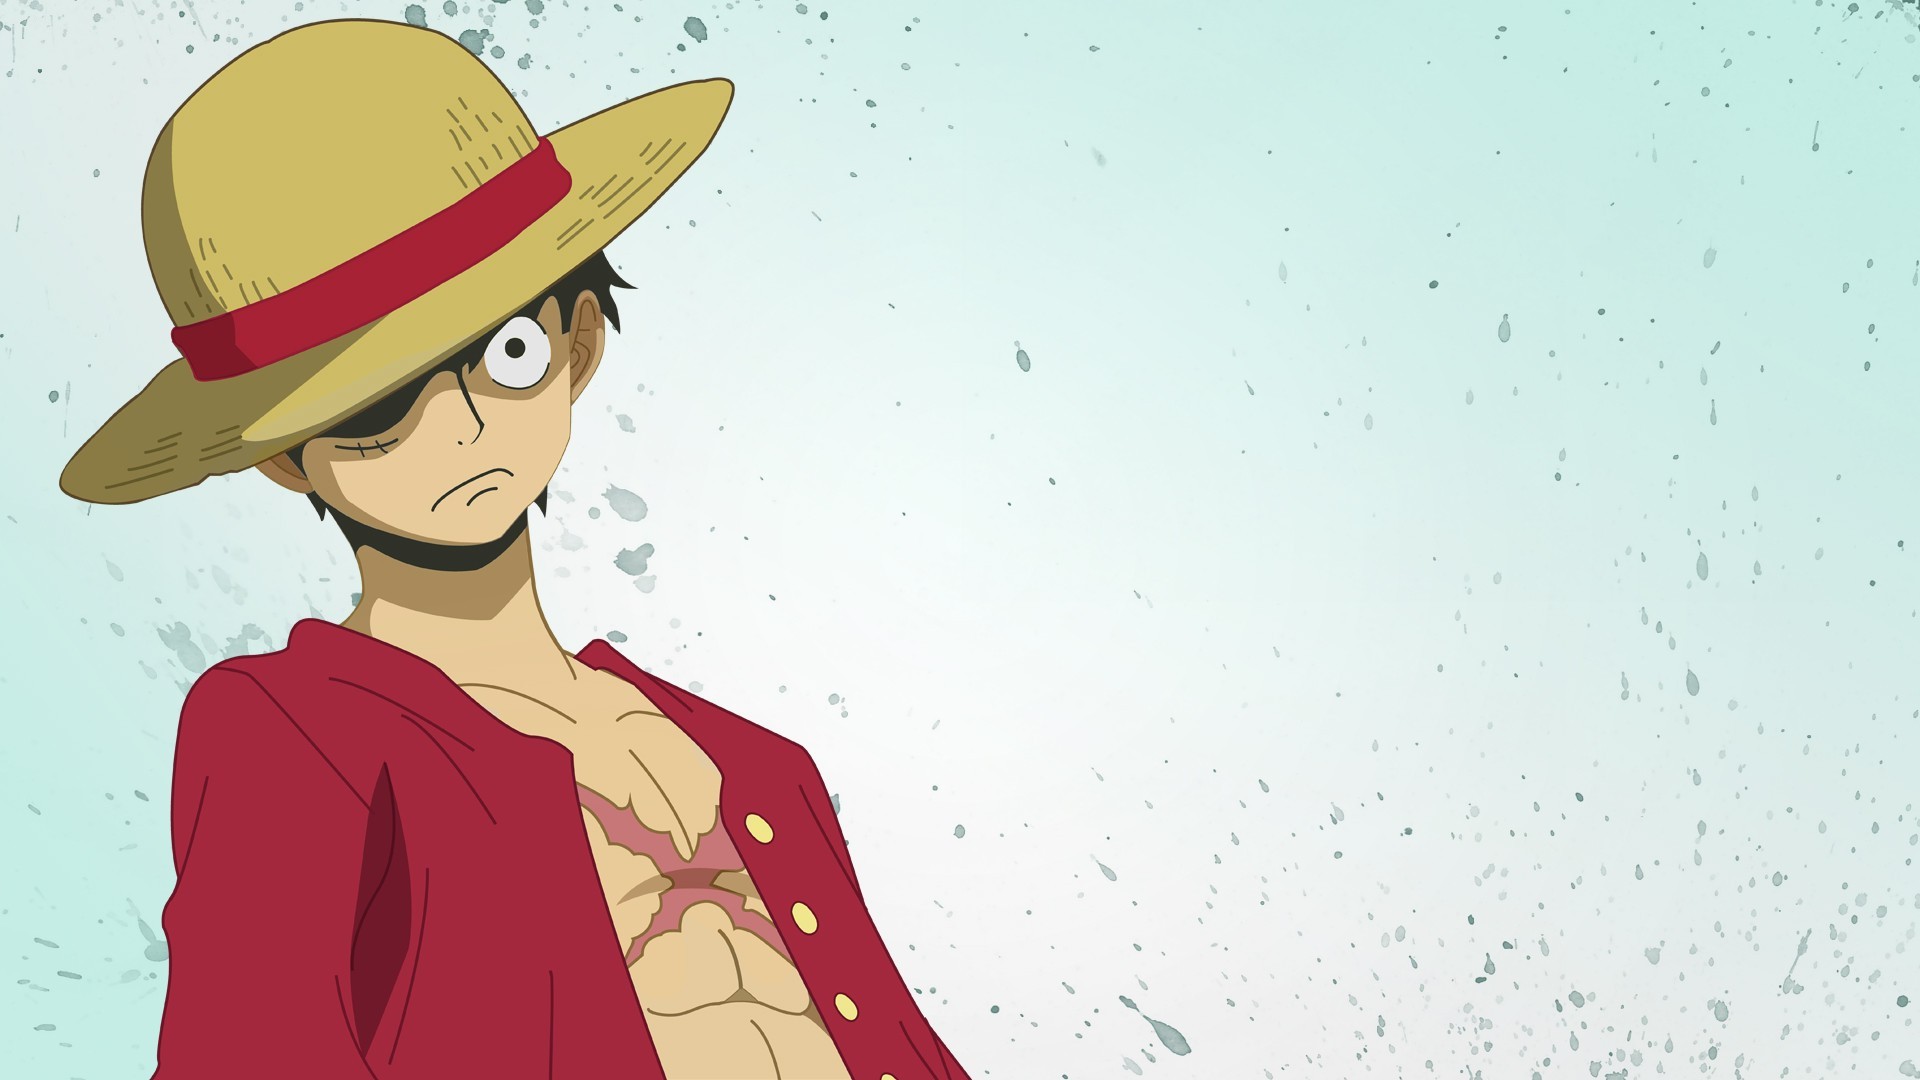 One Piece Luffy Wallpaper High Res 5807 Wallpaper Cool 1920x1080